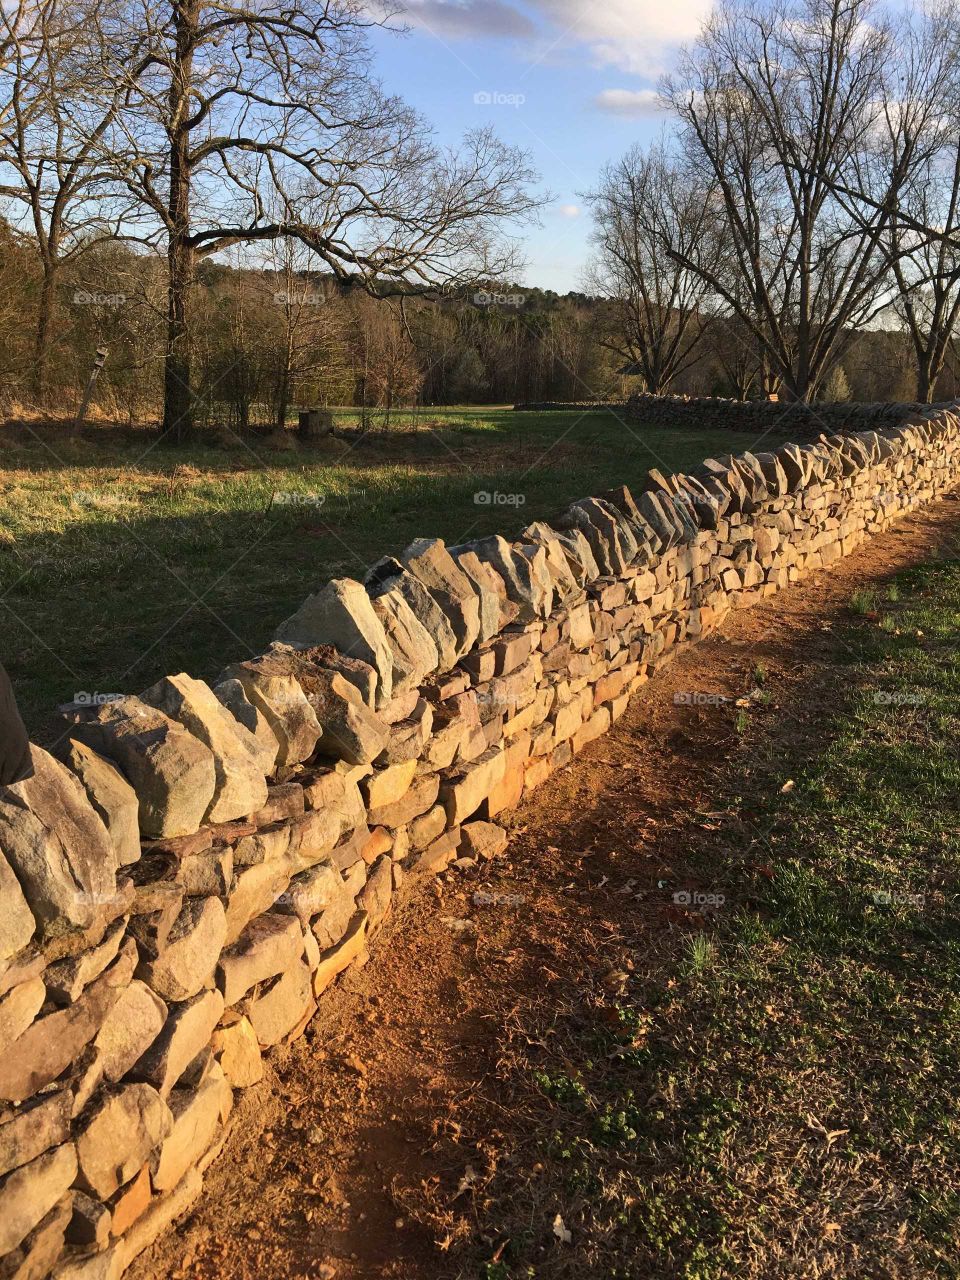 stacked stone wall